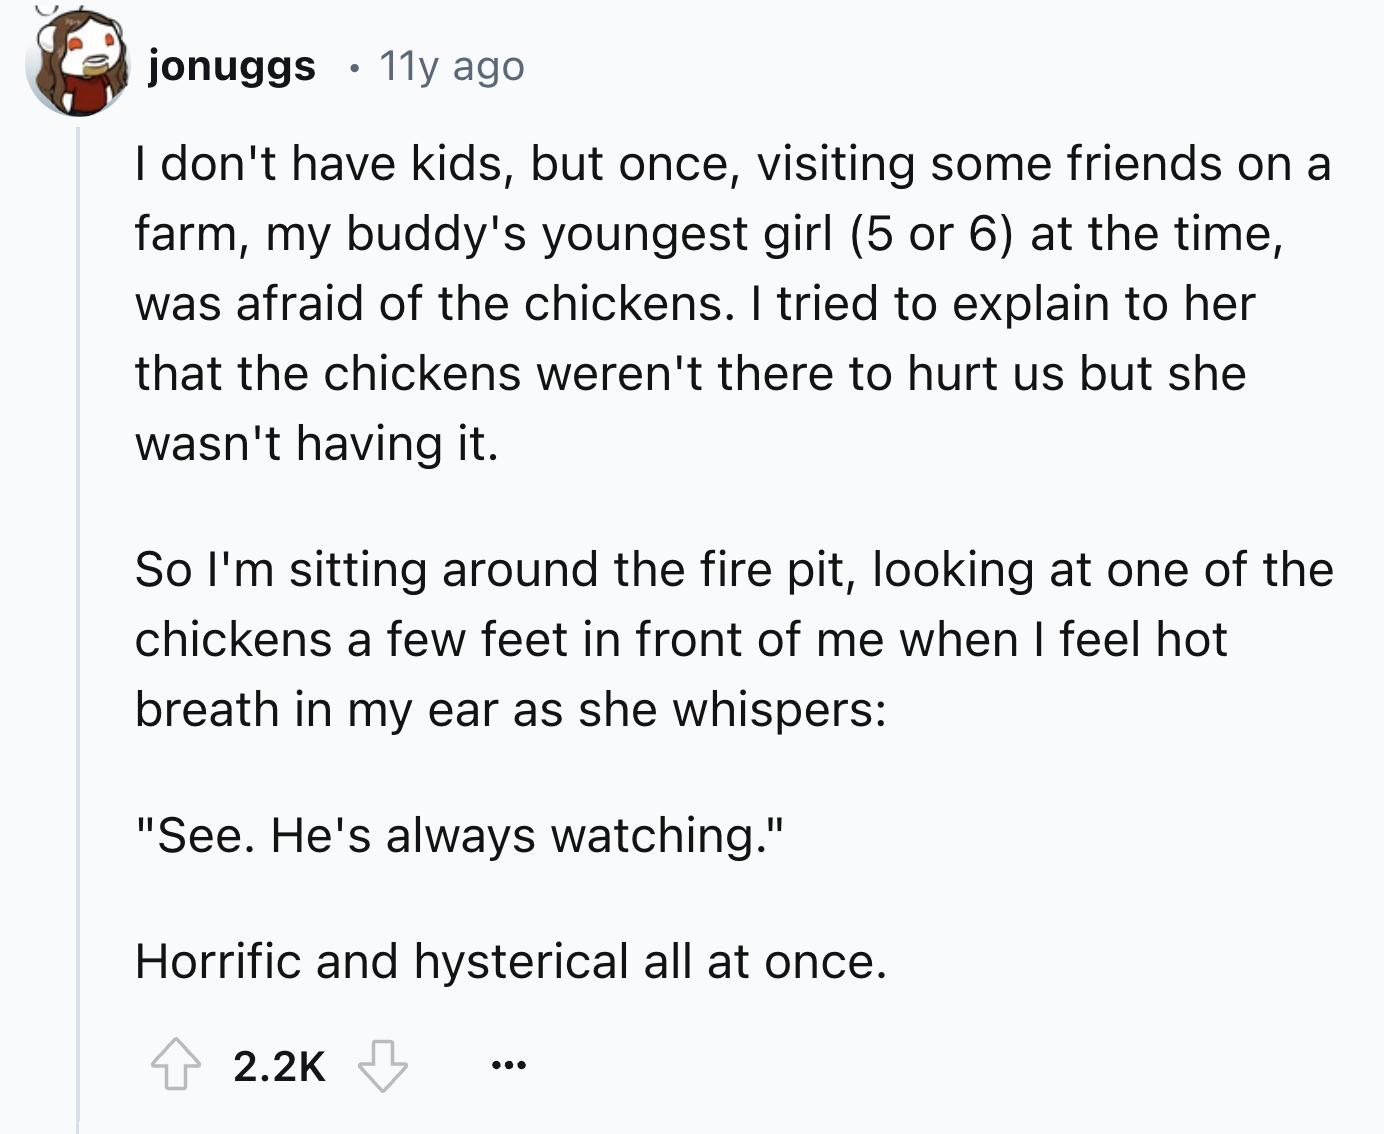 number - jonuggs 11y ago I don't have kids, but once, visiting some friends on a farm, my buddy's youngest girl 5 or 6 at the time, was afraid of the chickens. I tried to explain to her that the chickens weren't there to hurt us but she wasn't having it. 